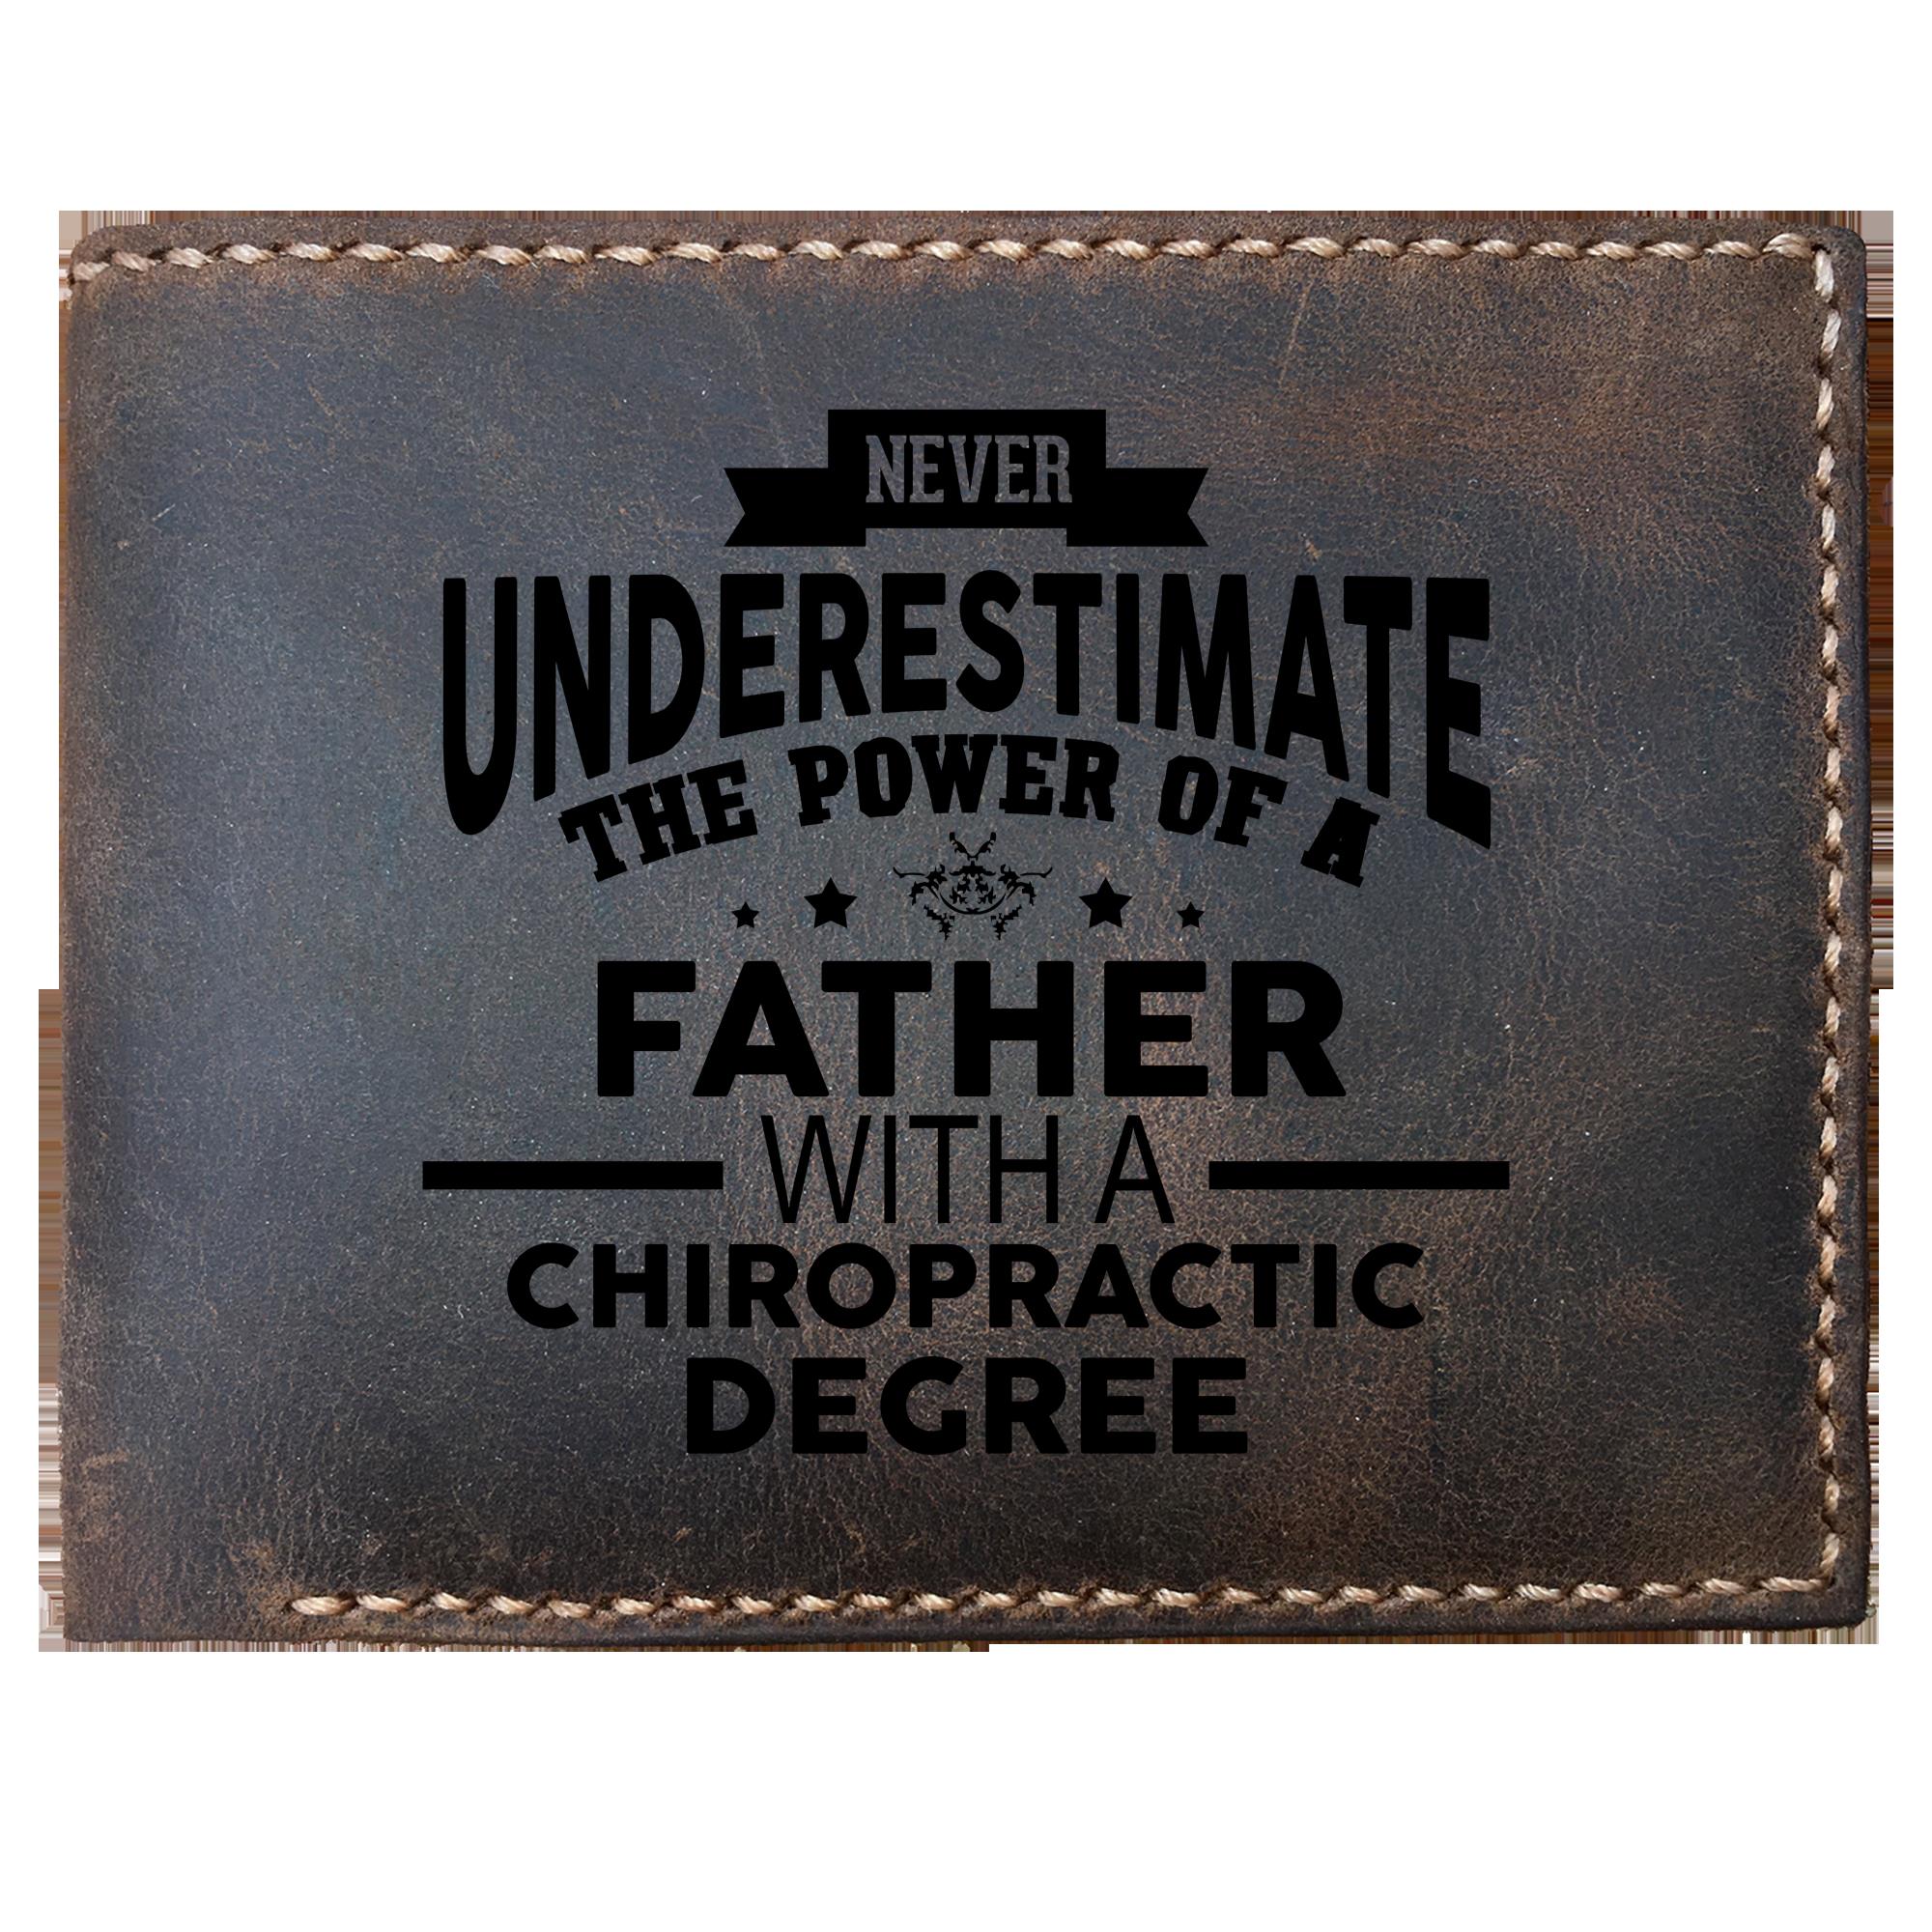 Skitongifts Funny Custom Engraved Bifold Leather Wallet For Men, Chiropractic Never Underestimate The Power Of A Father With A Chiropractic Degree